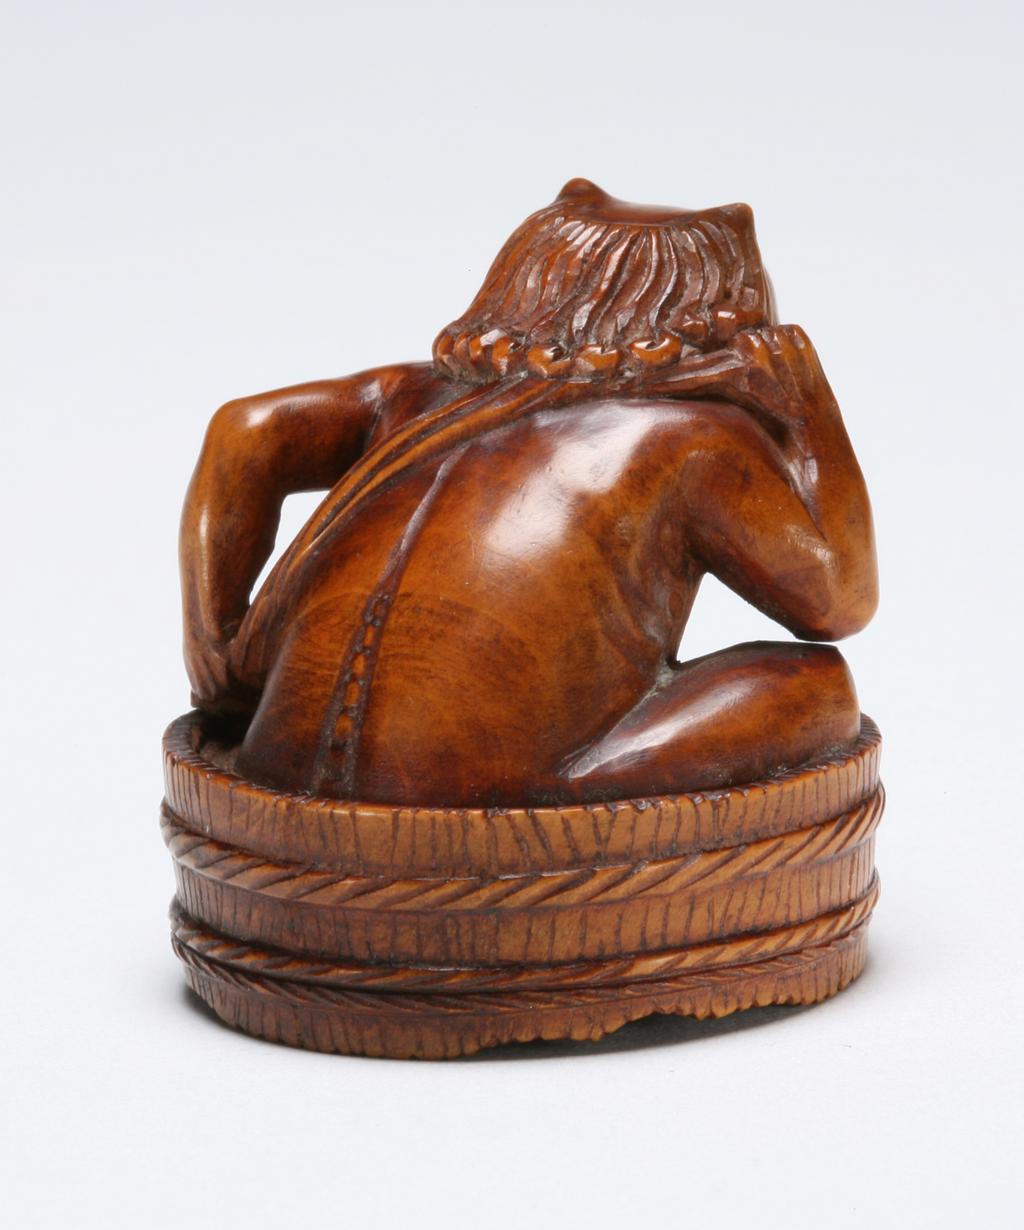 An image of Netsuke: katabori: Oni seated in a bath tub. Hanayama, Edo Period (1603-1868), Japan. An oni sitting in a bath tub drying his back with a towel. Facial features are wide and the mouth is pulled into a grimace. He has two horns on top of his head, a bald central patch and long hair. Himotoshi on the underside. Wood, carved with inalid decoration, height, whole, 3.5 cm, width, whole, 3.5 cm, circa 1800-1868. Edo Period (1615-1868).